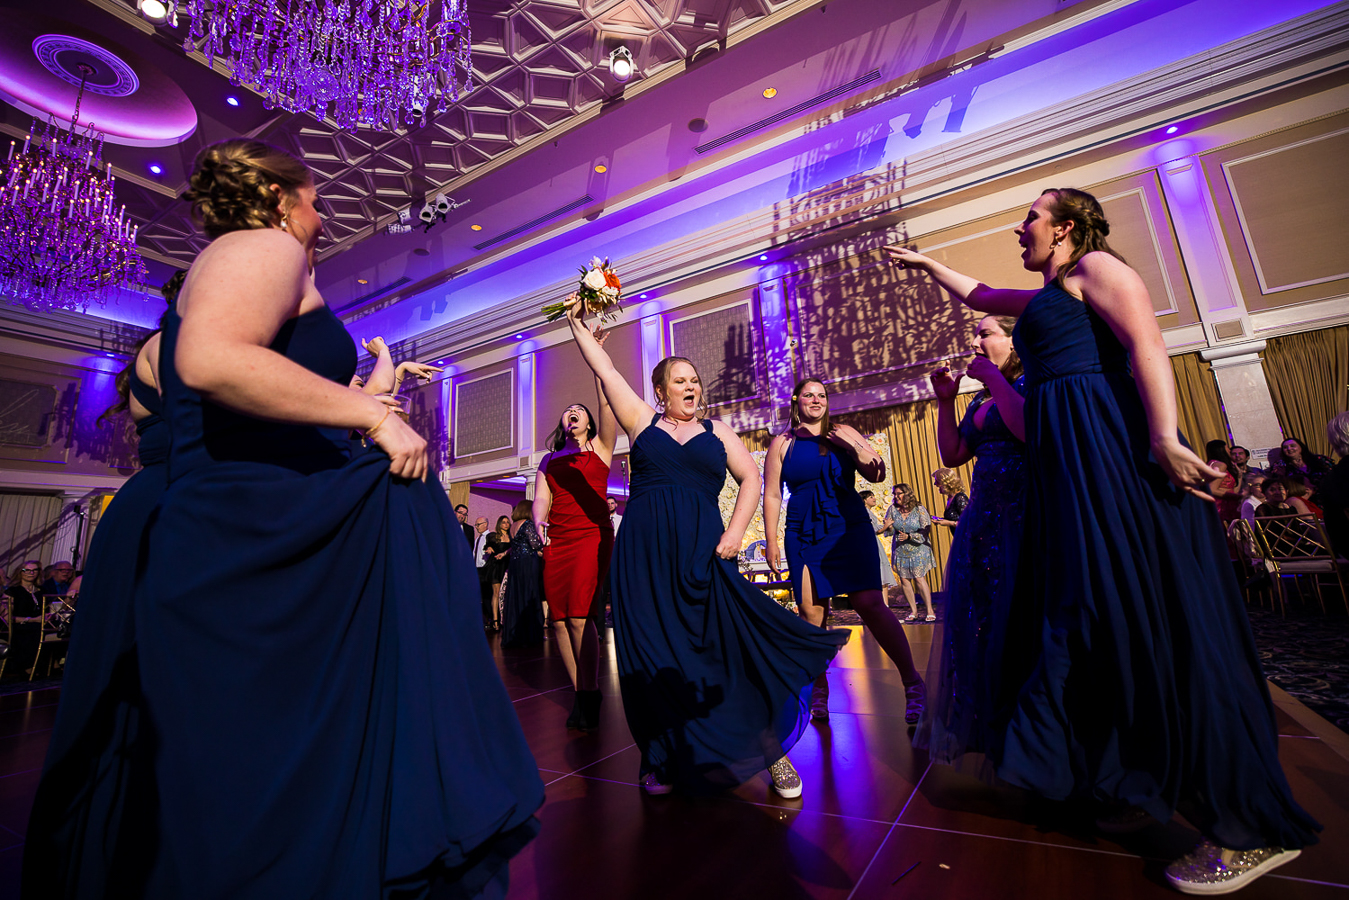 image of a bridemaid dancing around excited after she captures the bouquet during the wedding reception